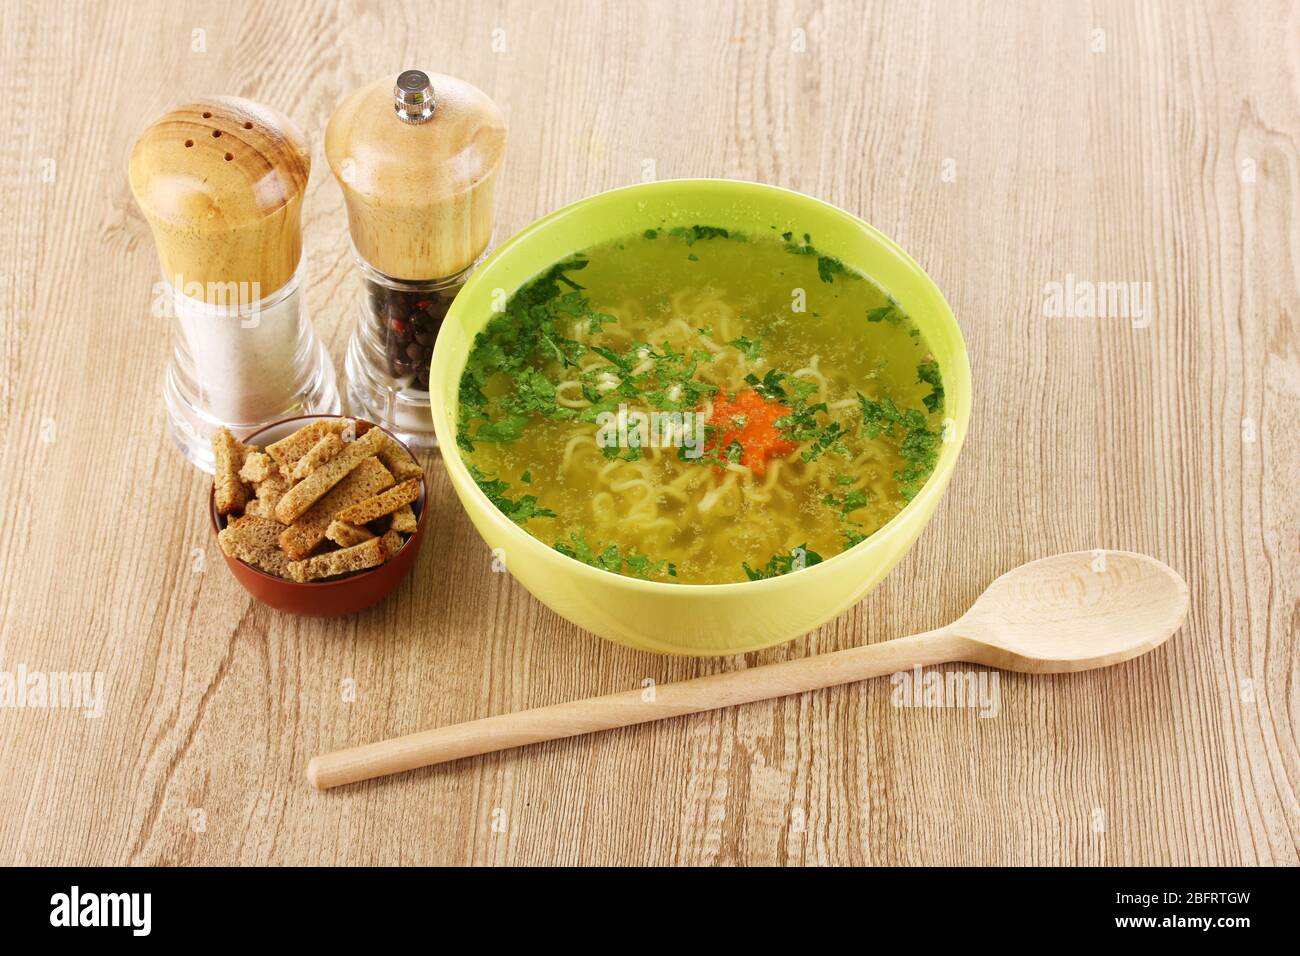 Tasty chicken stock with noodles on wooden background Stock Photo